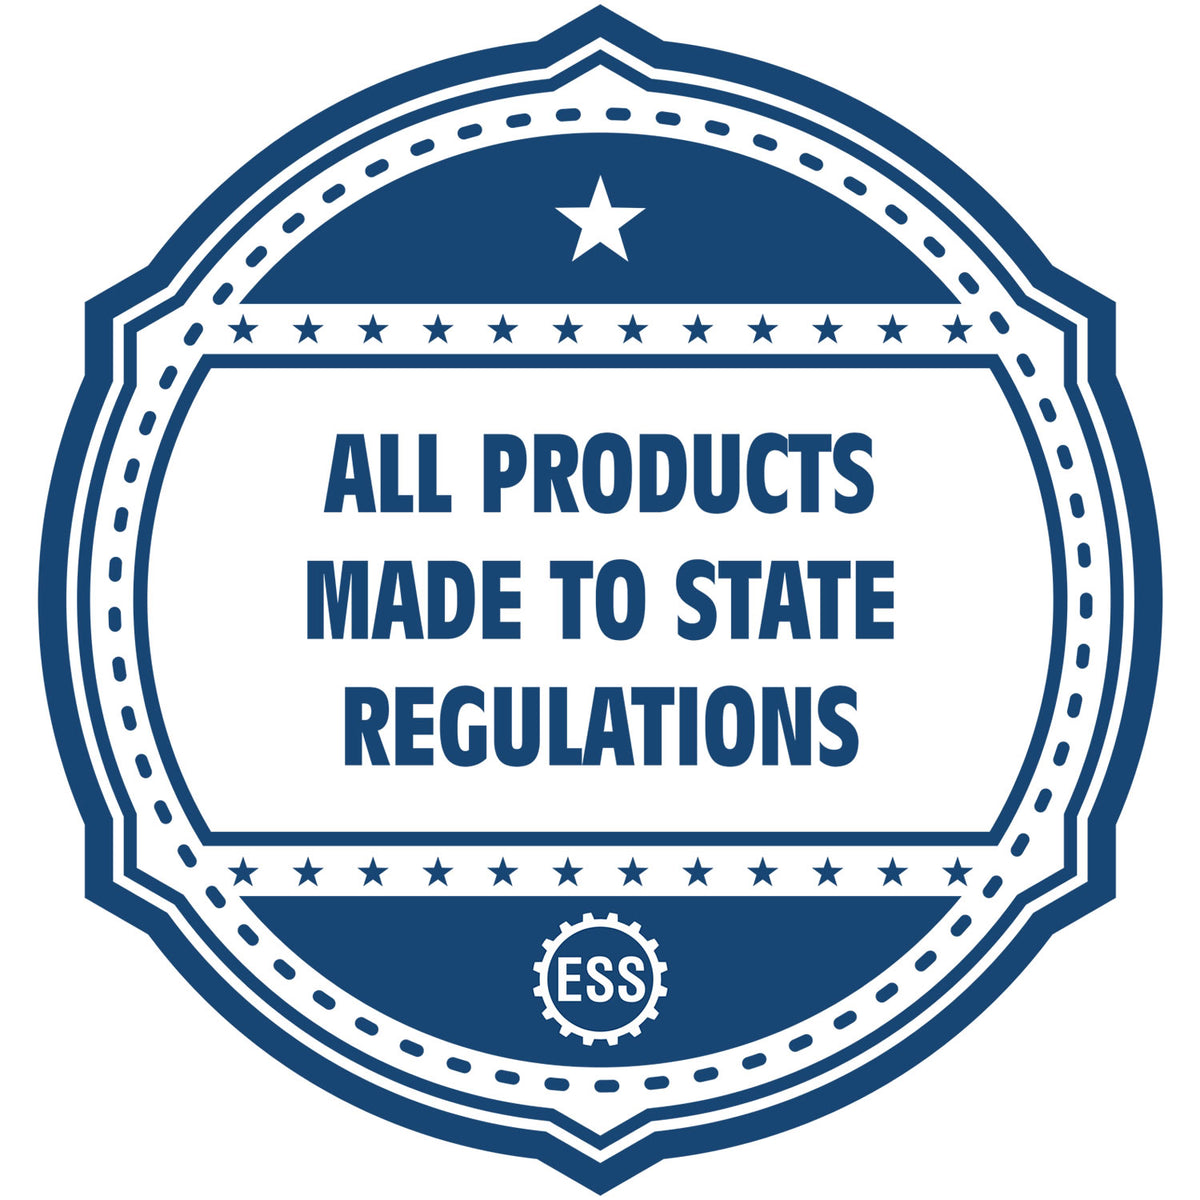 An icon or badge element for the Slim Pre-Inked Louisiana Land Surveyor Seal Stamp showing that this product is made in compliance with state regulations.